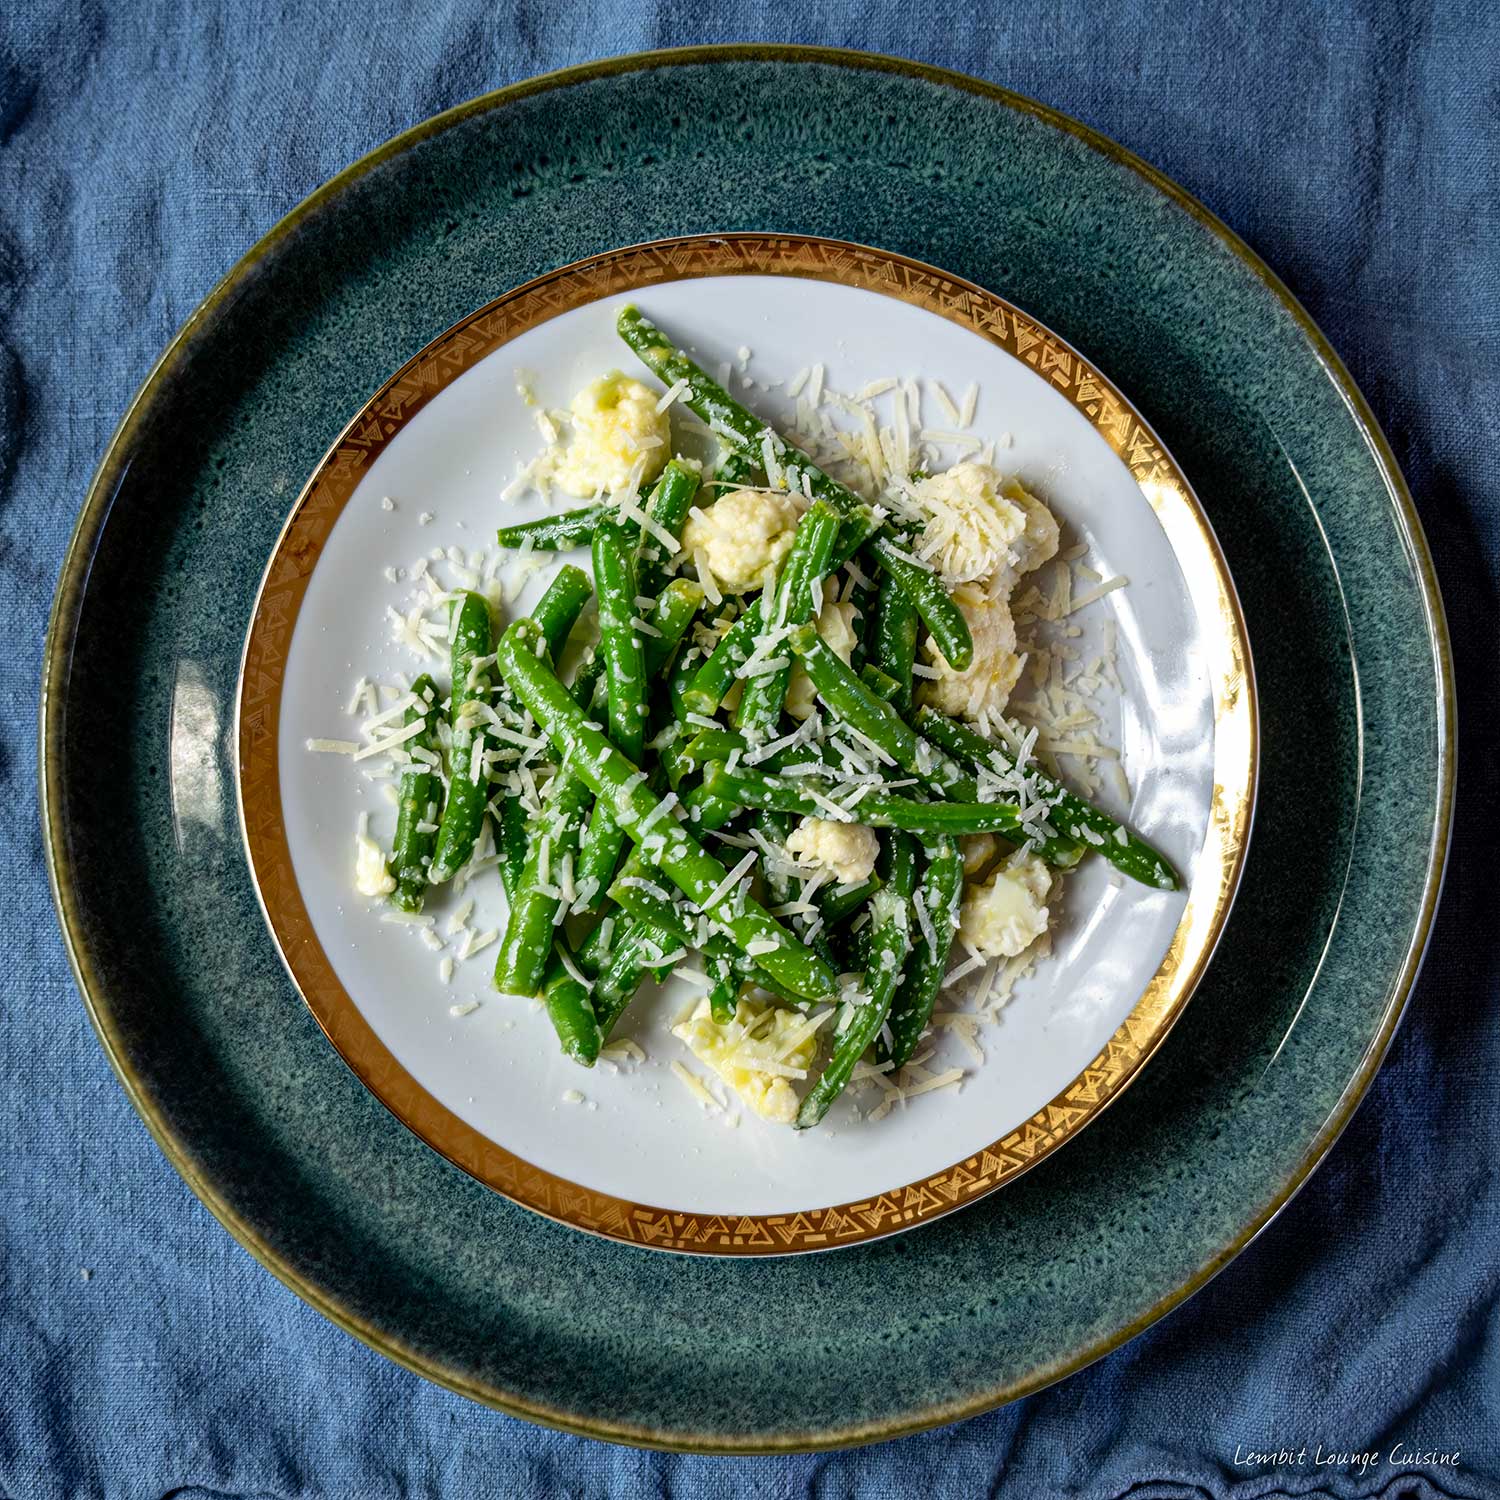 Haricot Verts with Lemon and Parmesan and Cauliflower, an easy and fresh side dish that is bursting with flavors of garlic and lemon